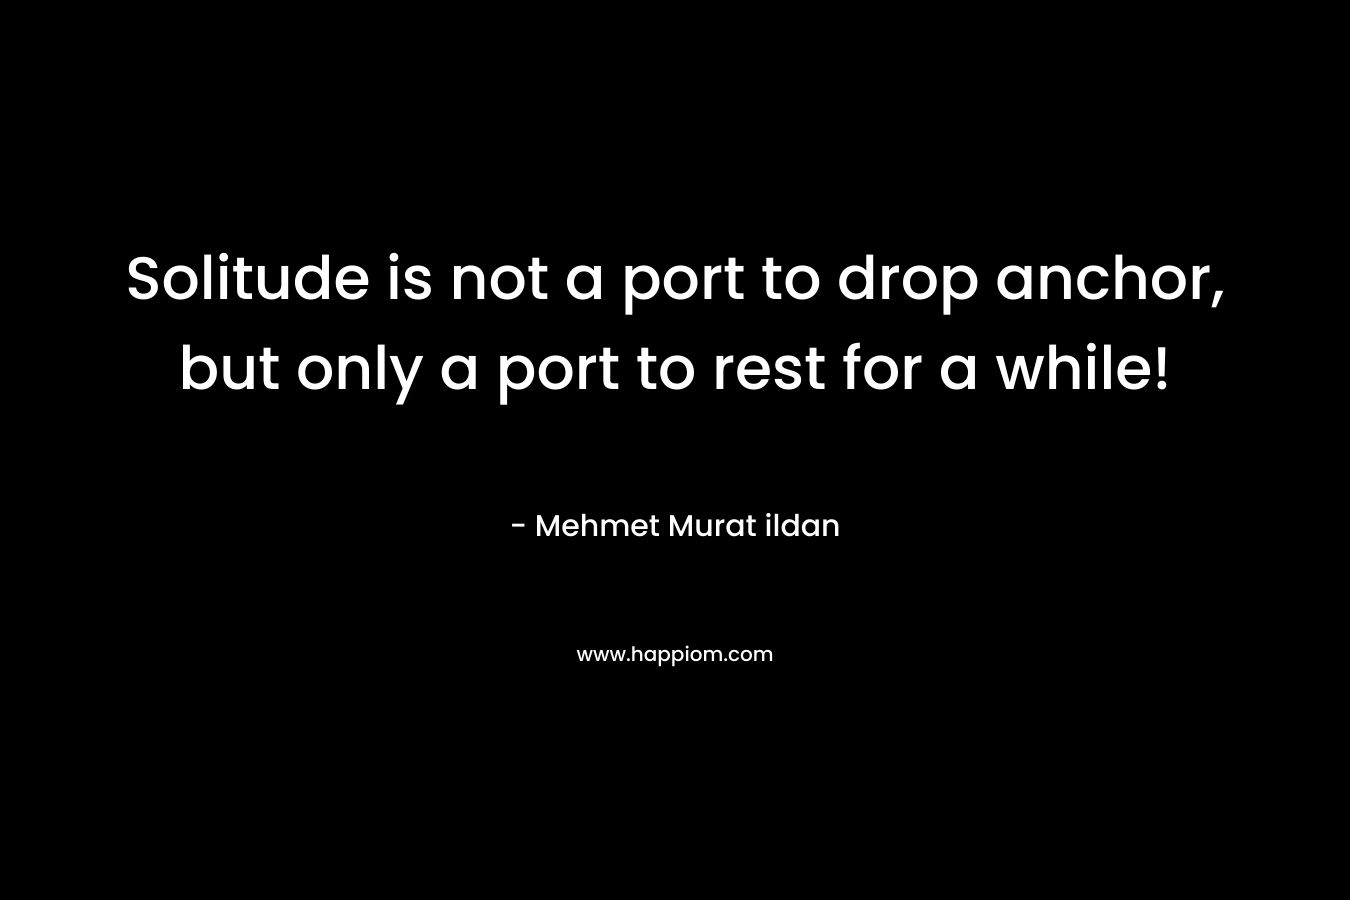 Solitude is not a port to drop anchor, but only a port to rest for a while! – Mehmet Murat ildan